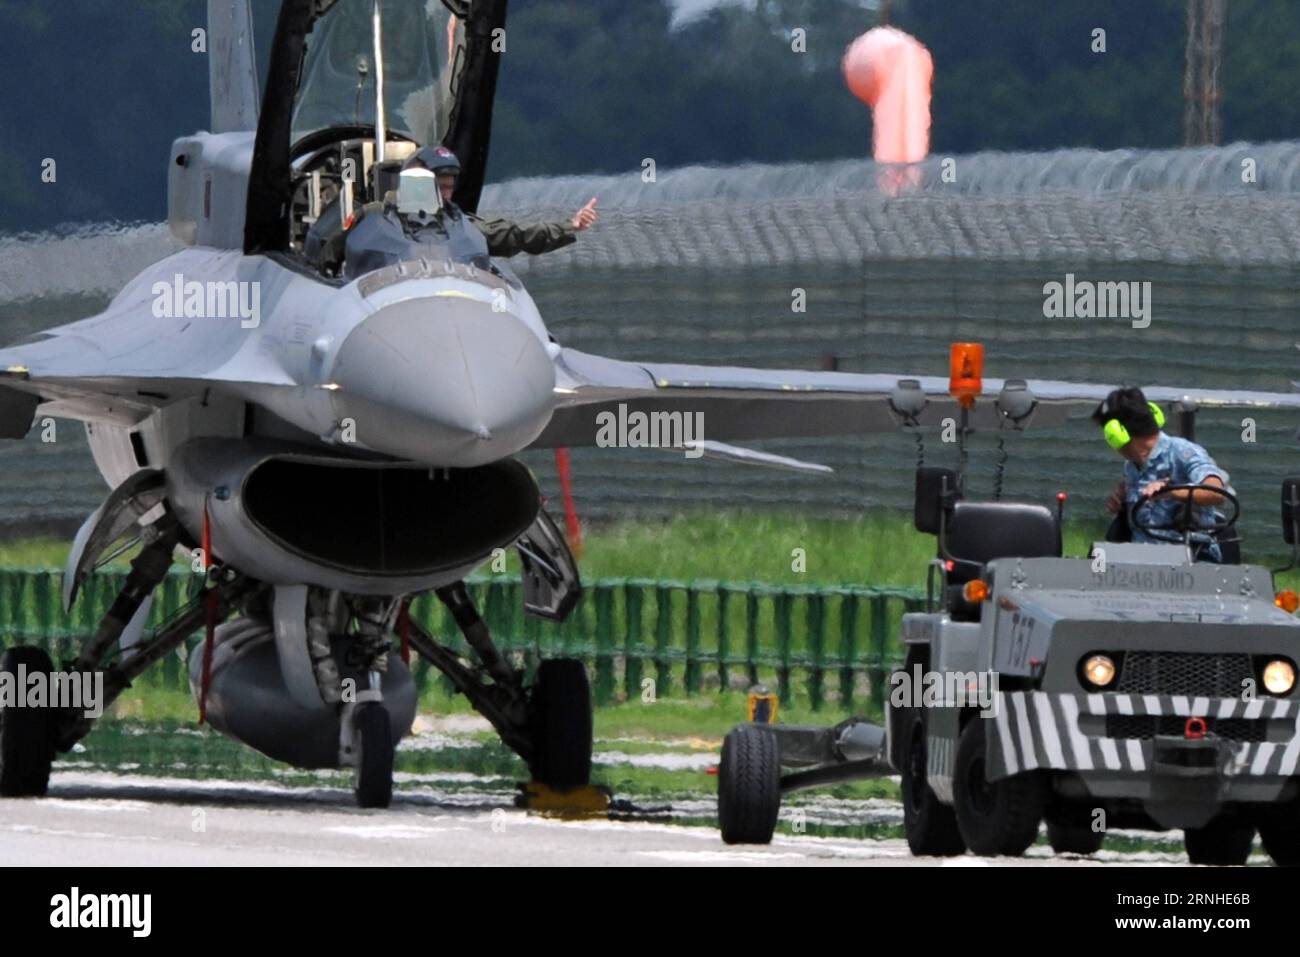 An F-16 fighter plane s pilot gives a thumbs-up during a rehearsal of exercise Torrent on Singapore s Lim Chu Kang road, Nov. 12, 2016. The Republic of Singapore Air Force (RSAF) Sunday conducted exercise Torrent, in which a public road was converted into a runway for aircraft take-off and landing. The alternate runway exercise, which was last conducted in 2008 and now is in its seventh edition, aims to increase RSAF s aircraft take-off and landing capability. ) (sxk) SINGAPORE-RSAF-EXERCISE TORRENT-REHEARSAL ThenxChihxWey PUBLICATIONxNOTxINxCHN   to F 16 Fighter Plane S Pilot Gives a Thumbs u Stock Photo